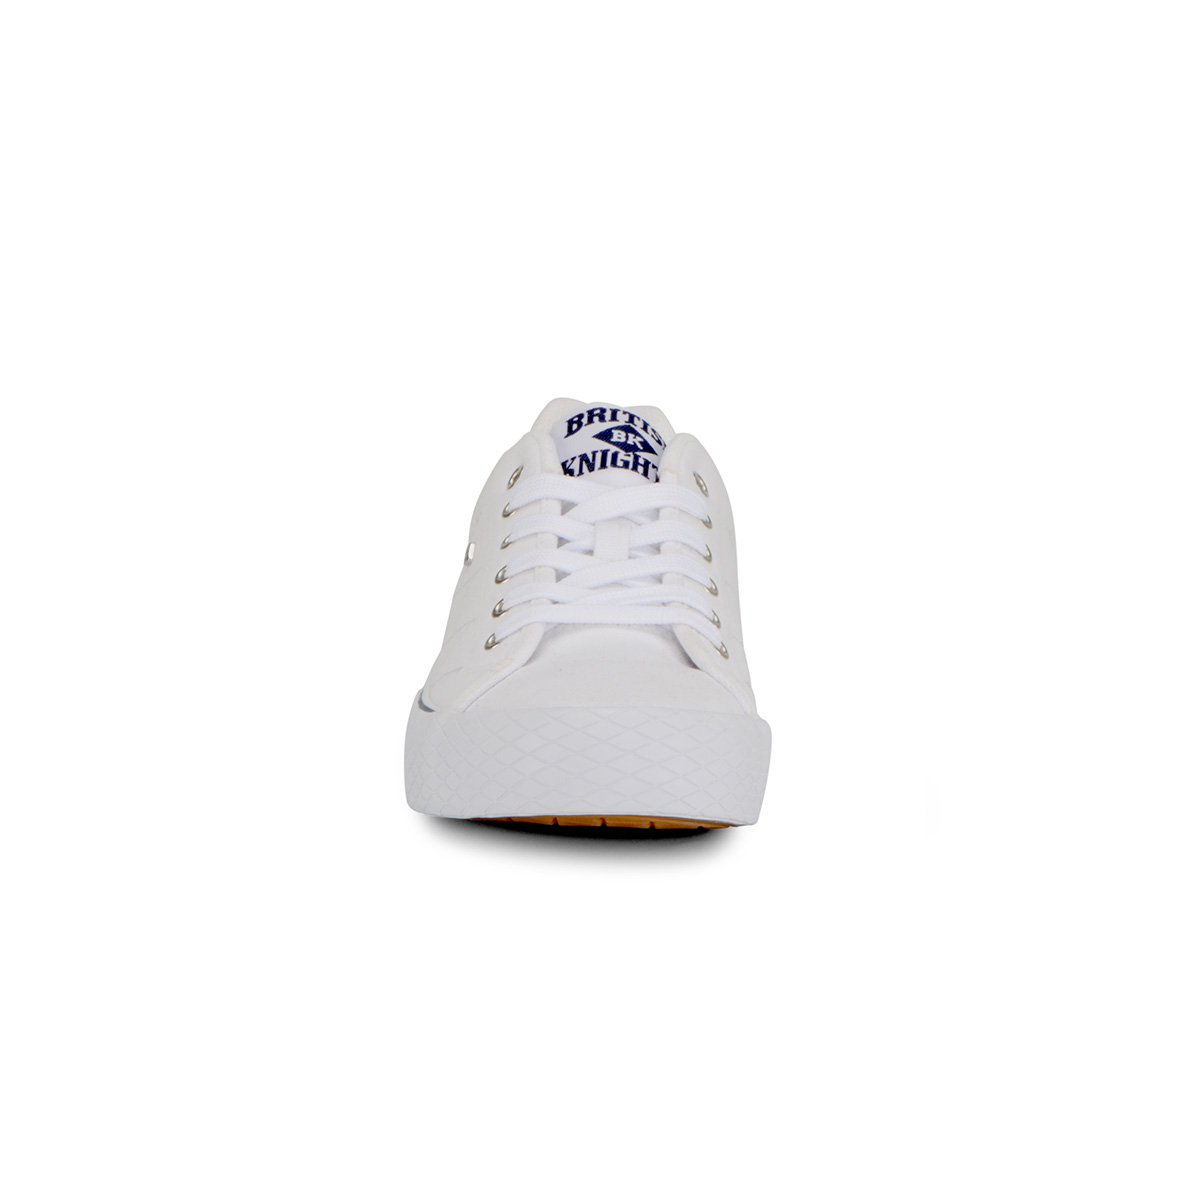 British Knights Men's Vulture 2 Canvas Sneaker Shoes - image 4 of 7